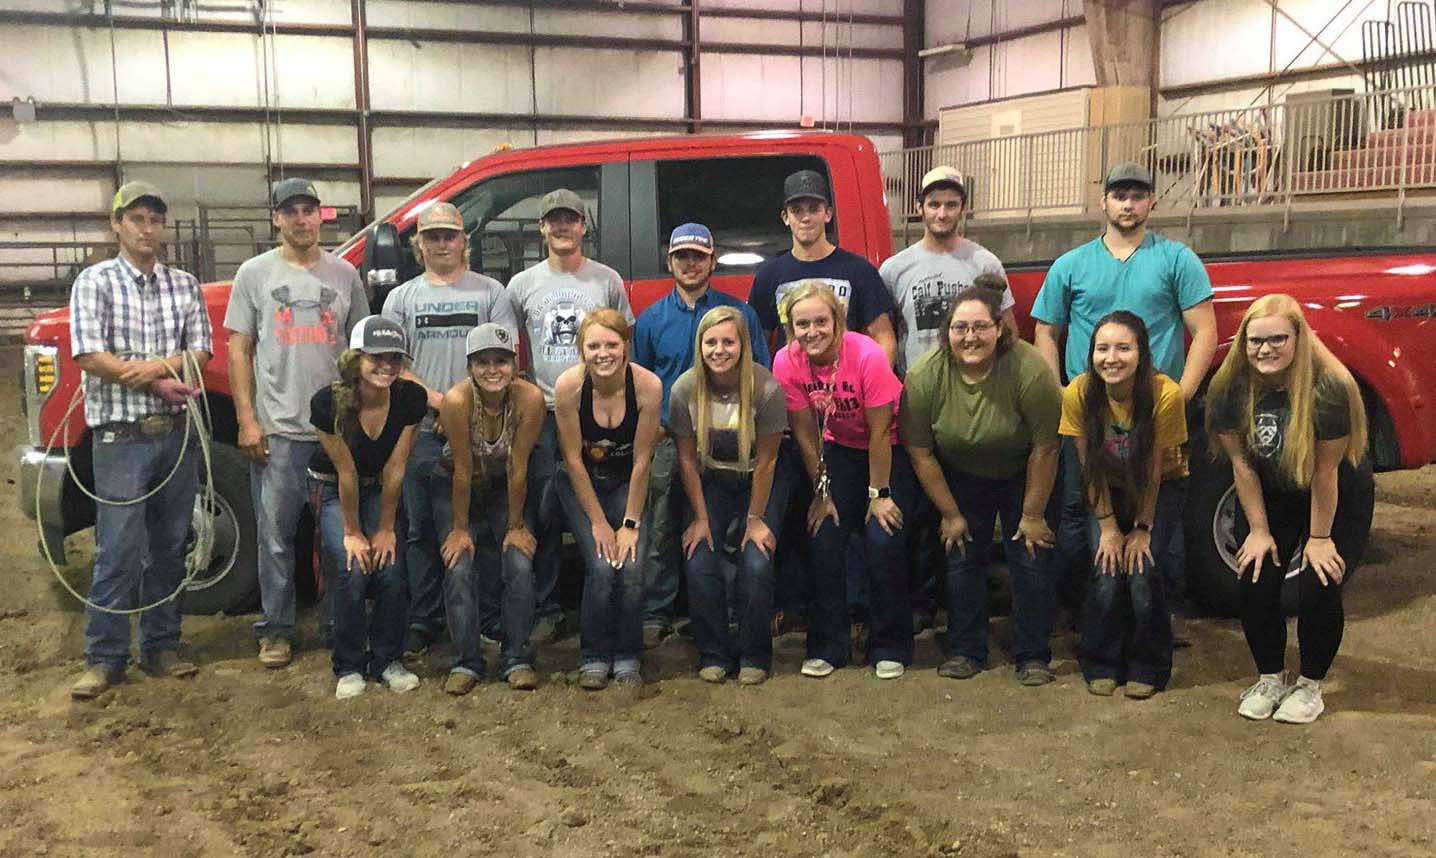 The NCTA Aggie Rodeo club organized for the 2019-2020 season with J.R. Dack (far left with rope) named as the coach. The season opener is at Wisconsin this weekend. (NCTA Photo)